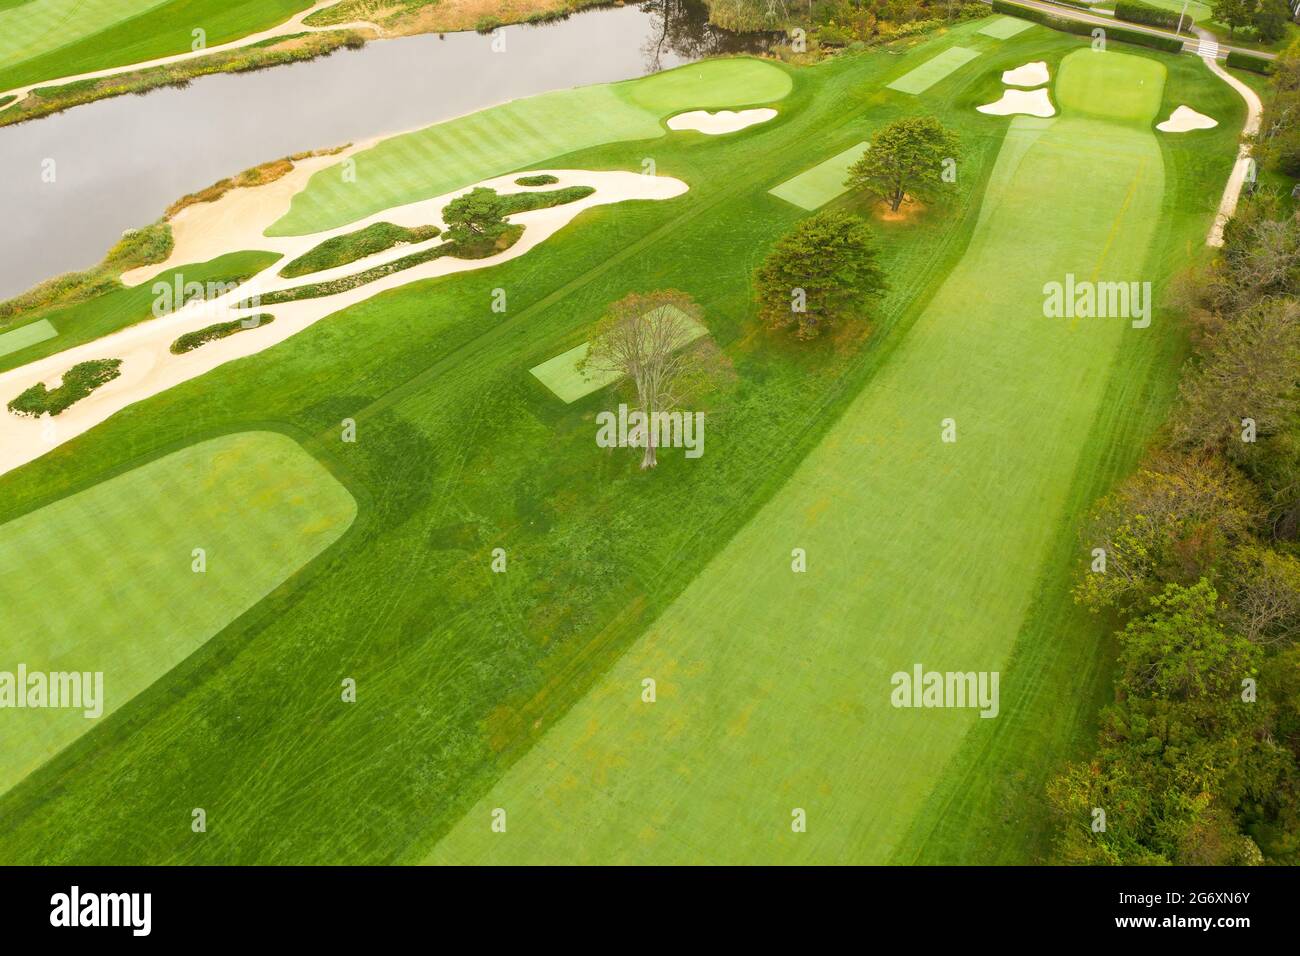 Aerial of a lush, green golf course. Stock Photo